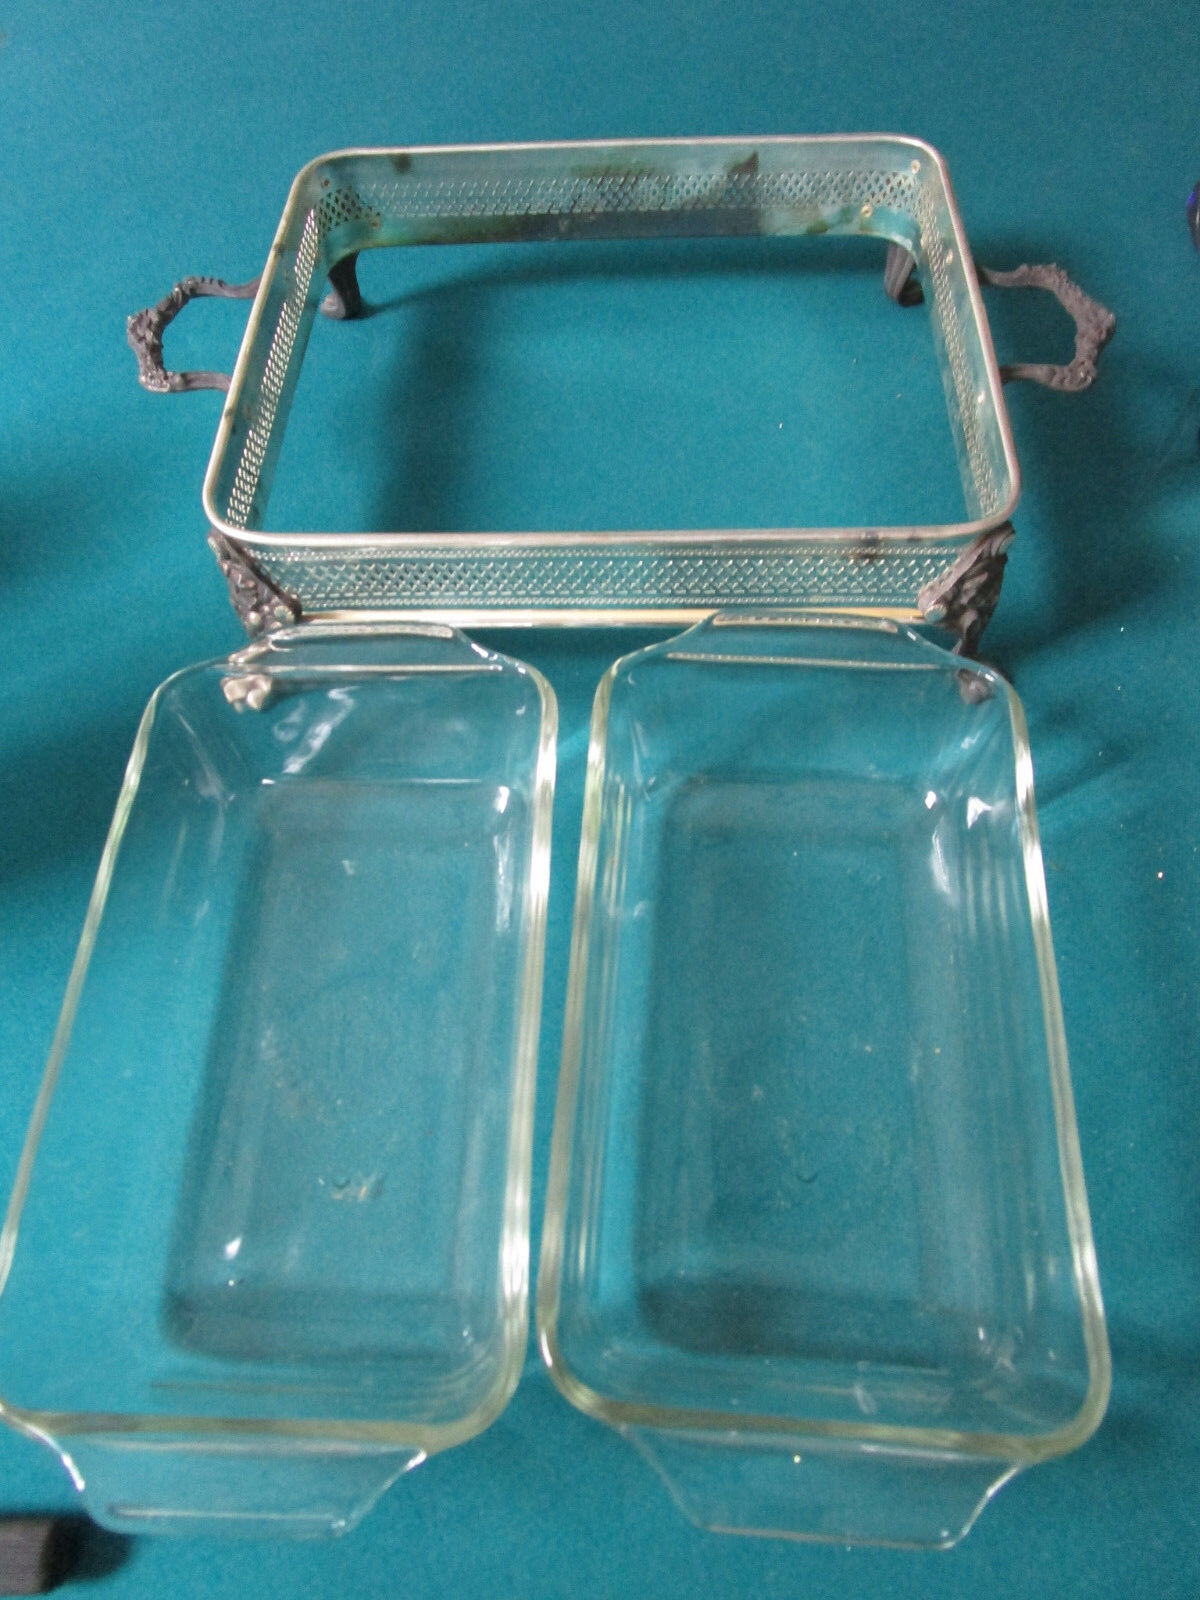 Primary image for METAL FOOTED STAND HOT FOOD SERVER WITH GLASS INSERTS ANCHOR HOCKING USA